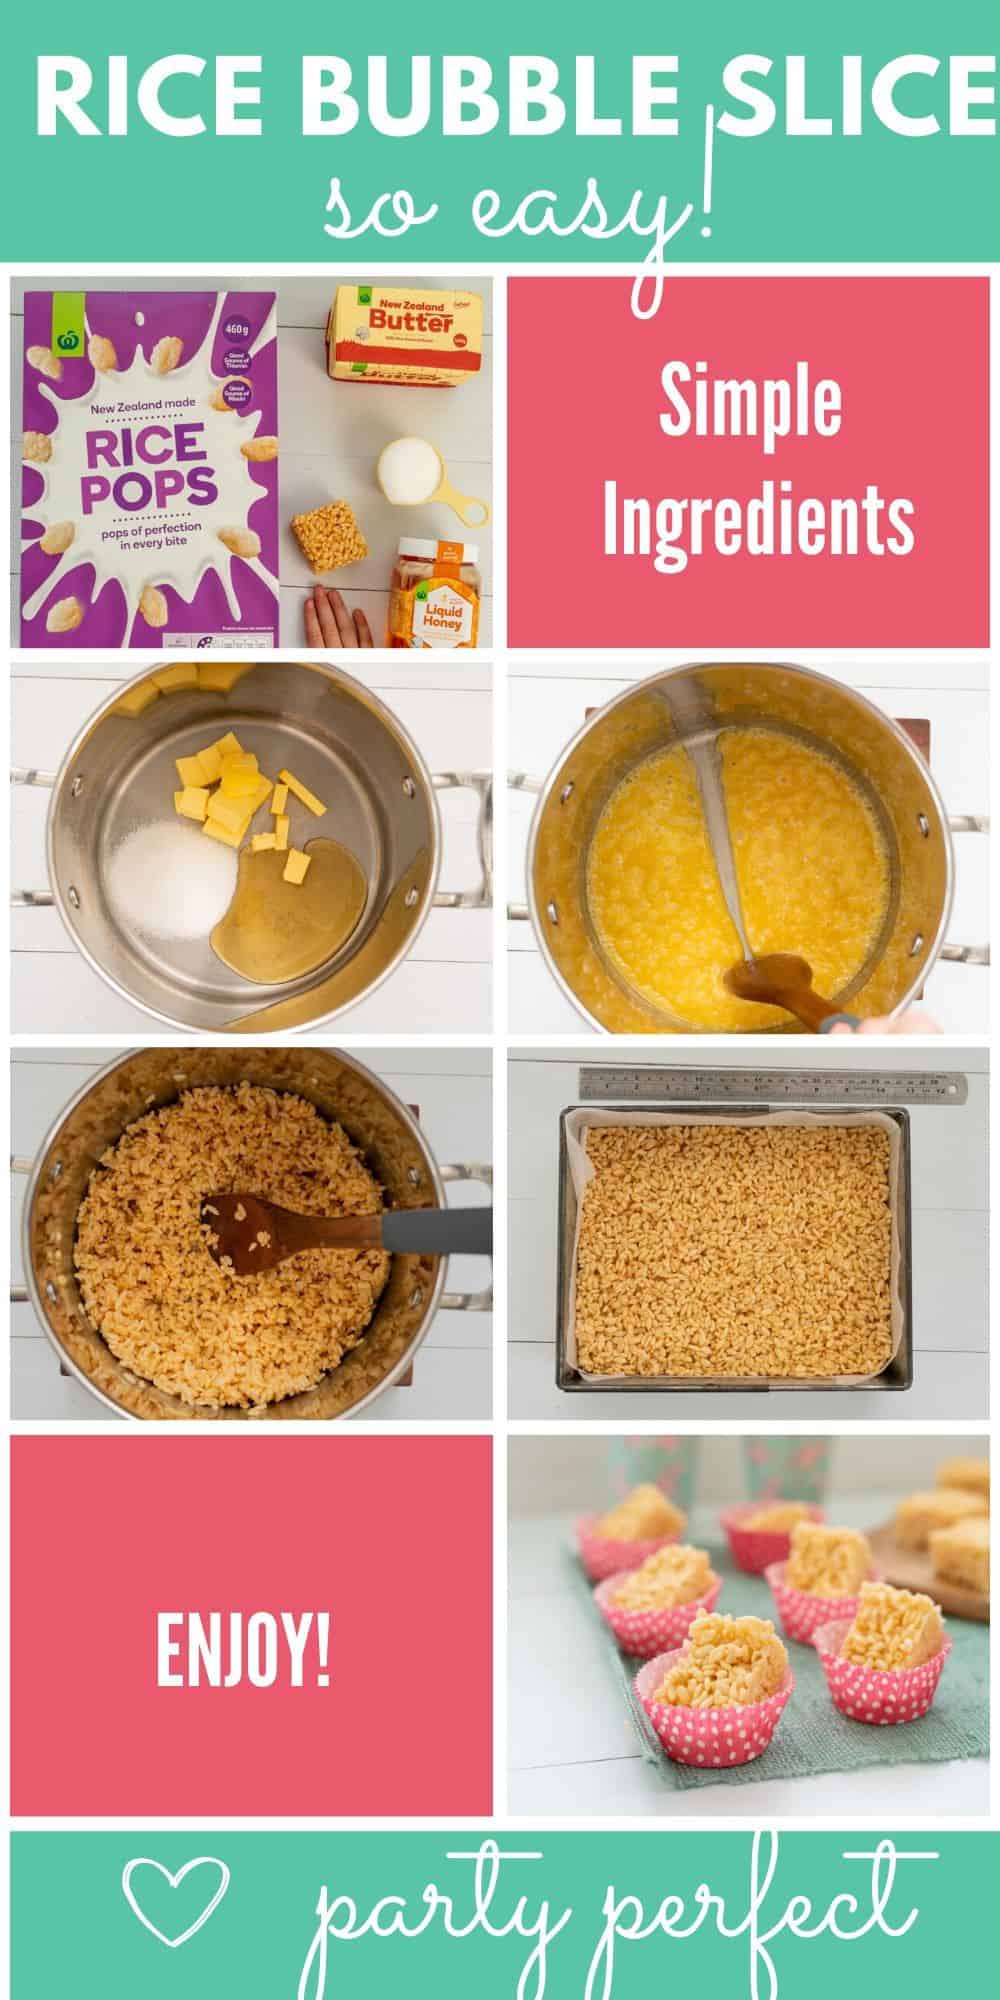 Process steps for making rice bubble slice